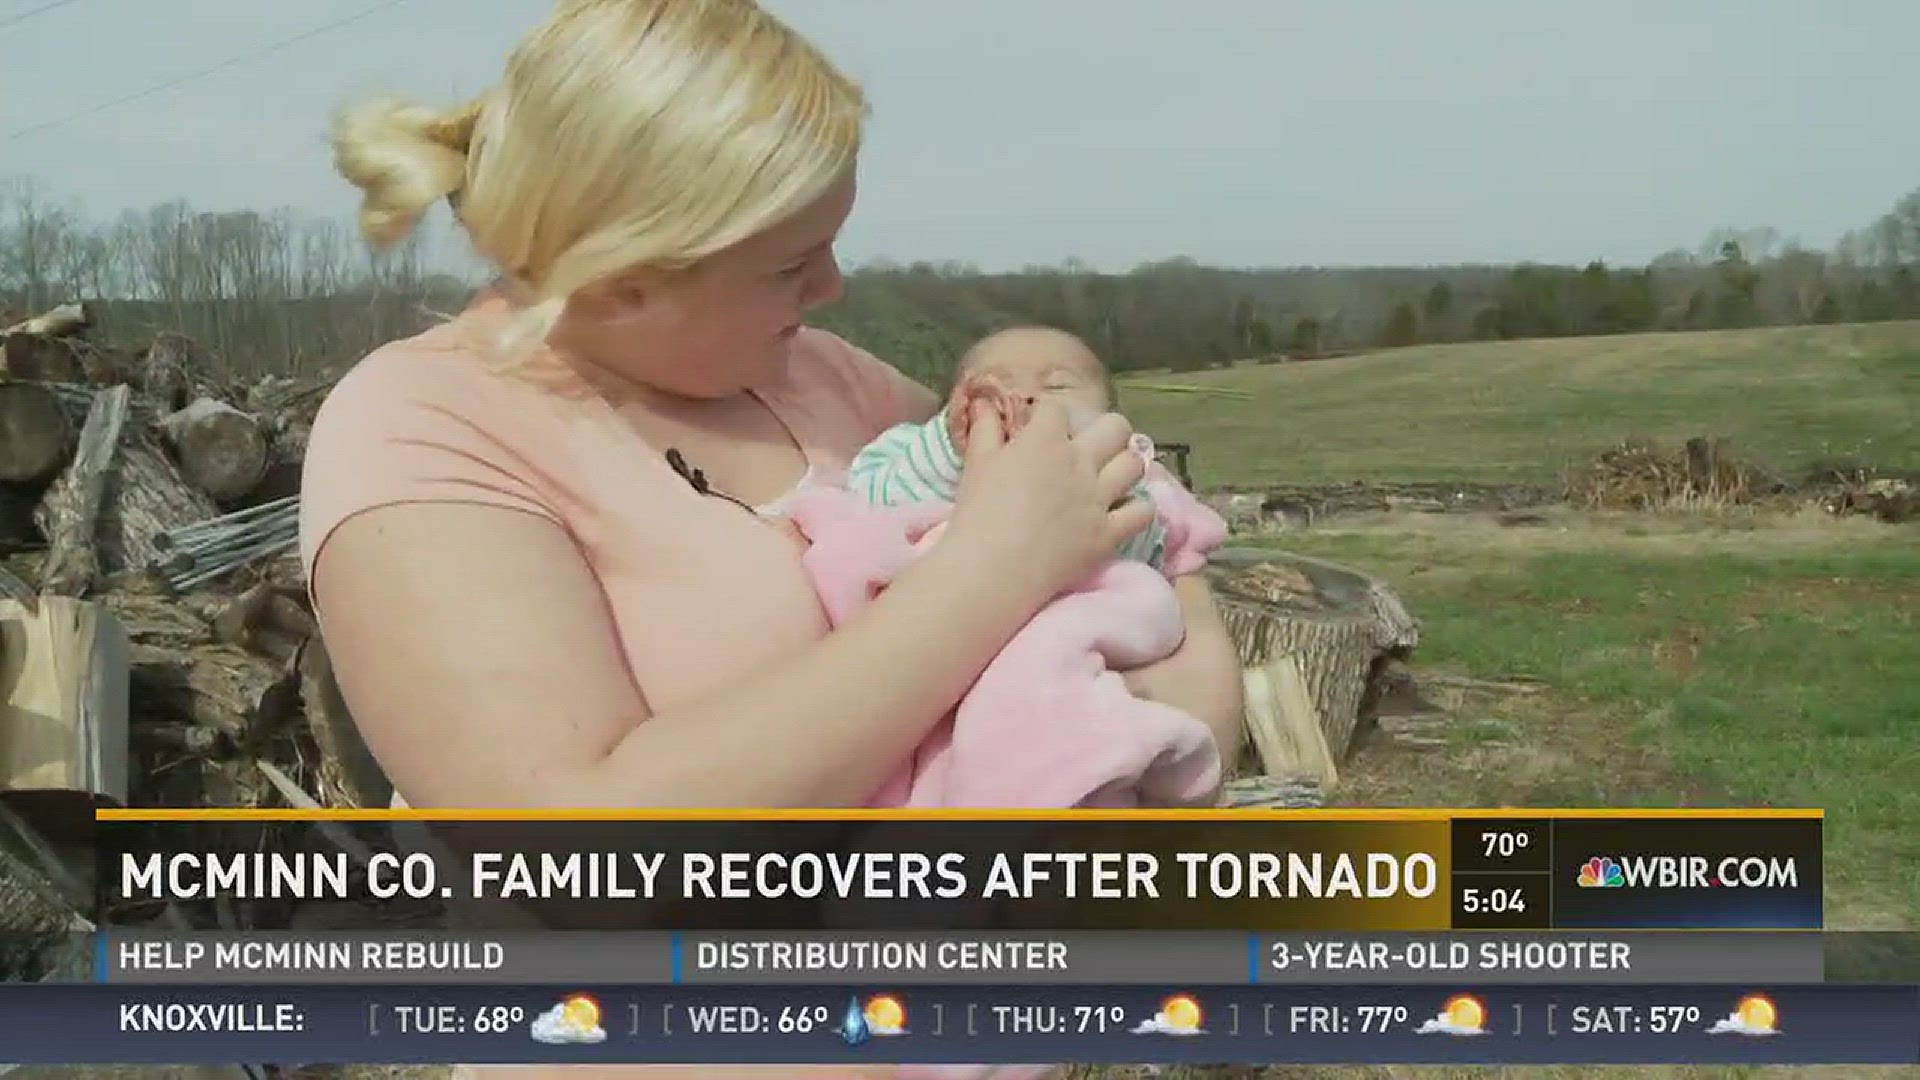 The Newman family says it's a miracle they're even alive. They were caught in the middle of the tornado. The high winds threw them 300 feet from their house. Mom Amber Newman was 39 weeks pregnant at the time.